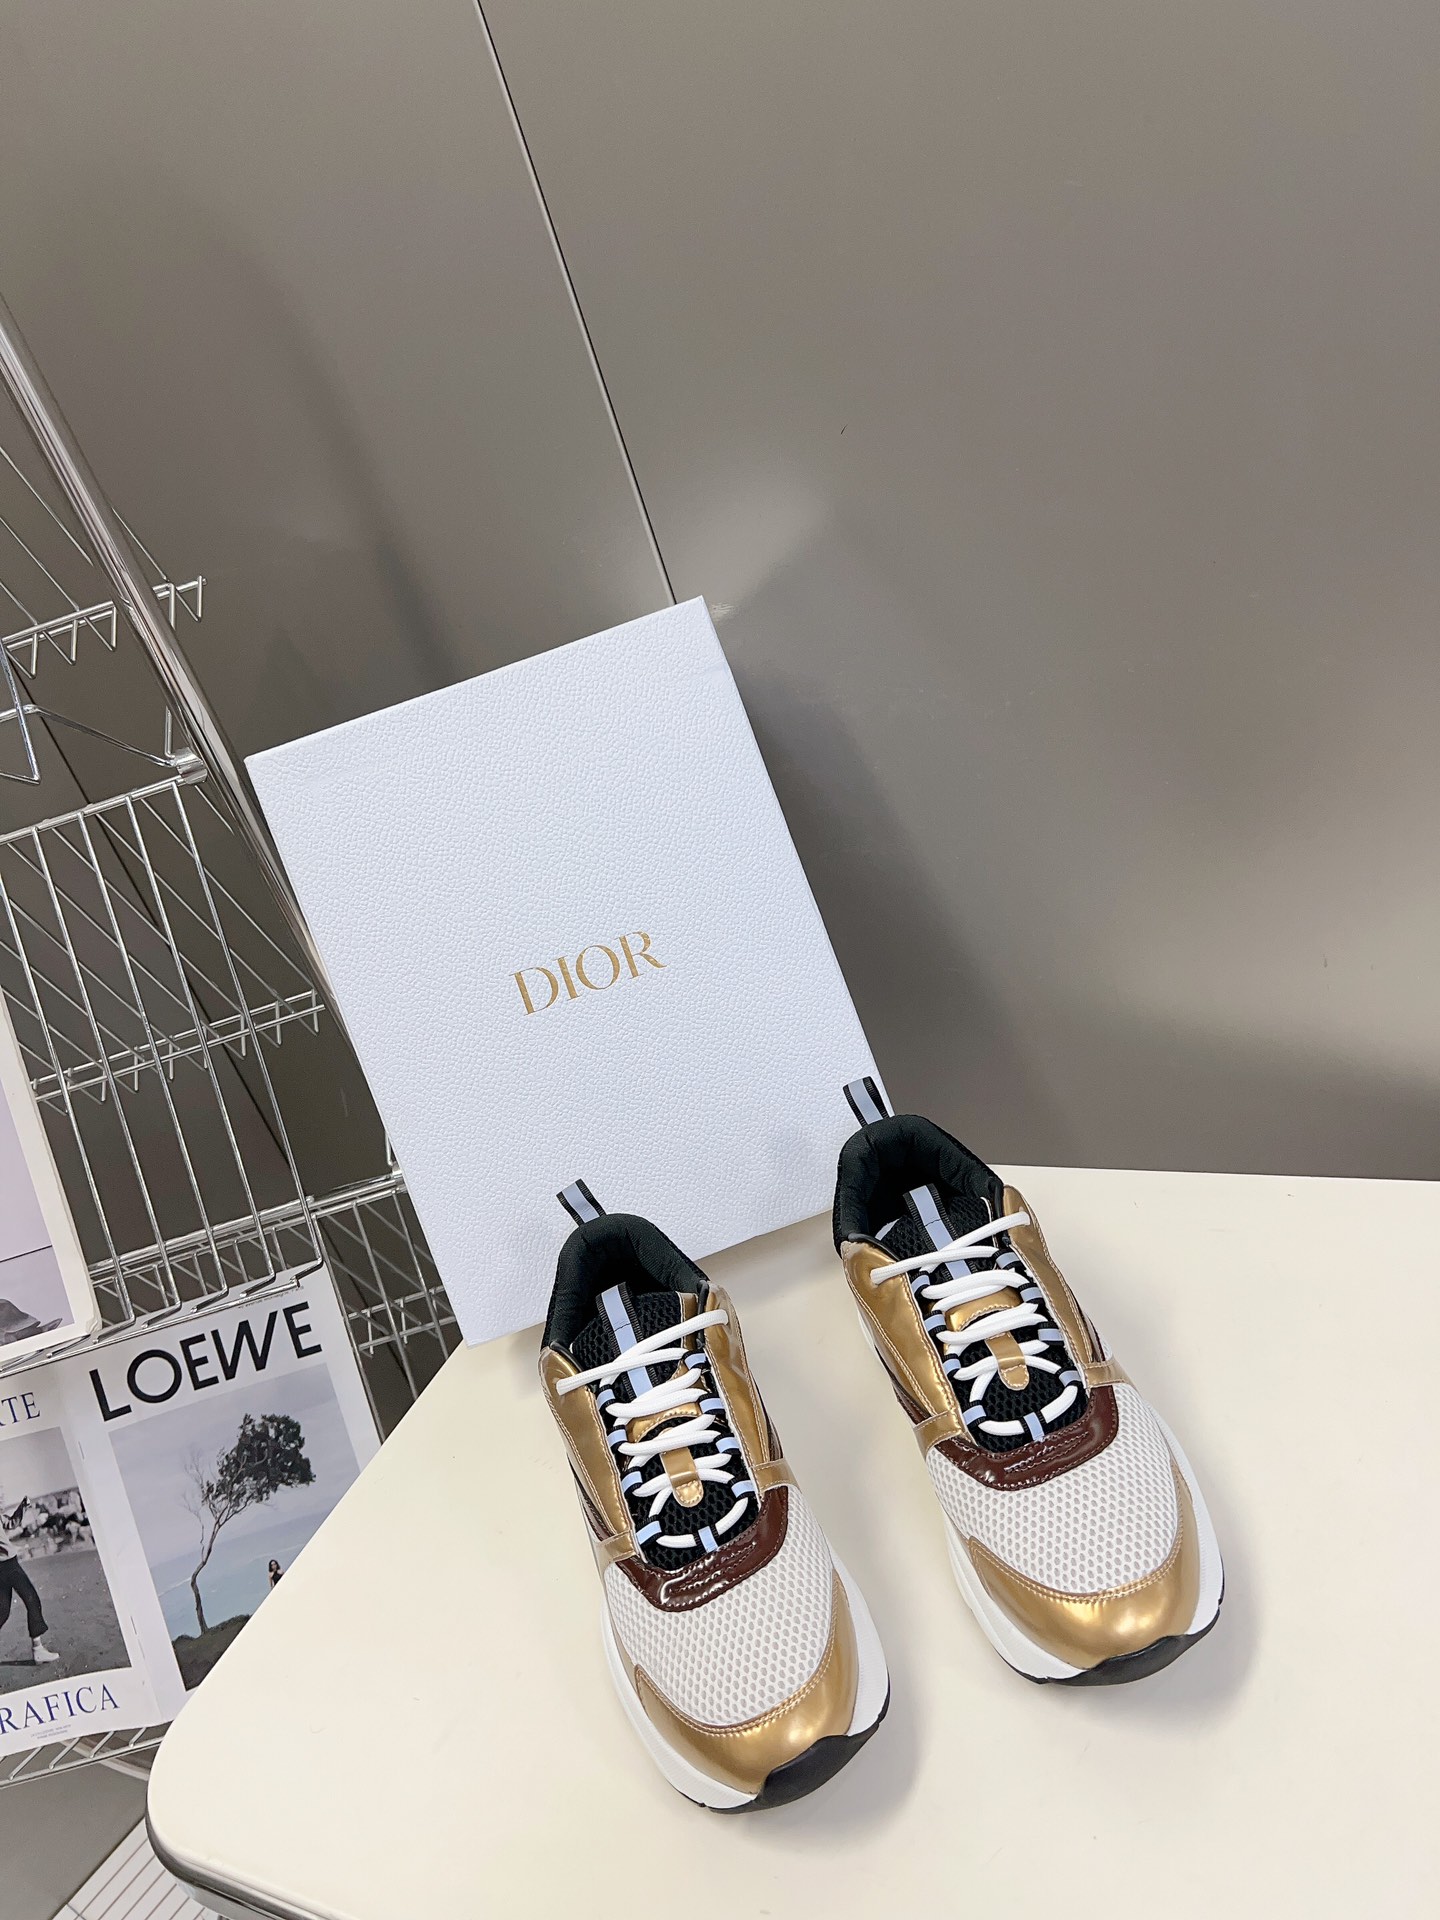 Dior Buy
 Shoes Sneakers Unisex Knitting Fashion Sweatpants